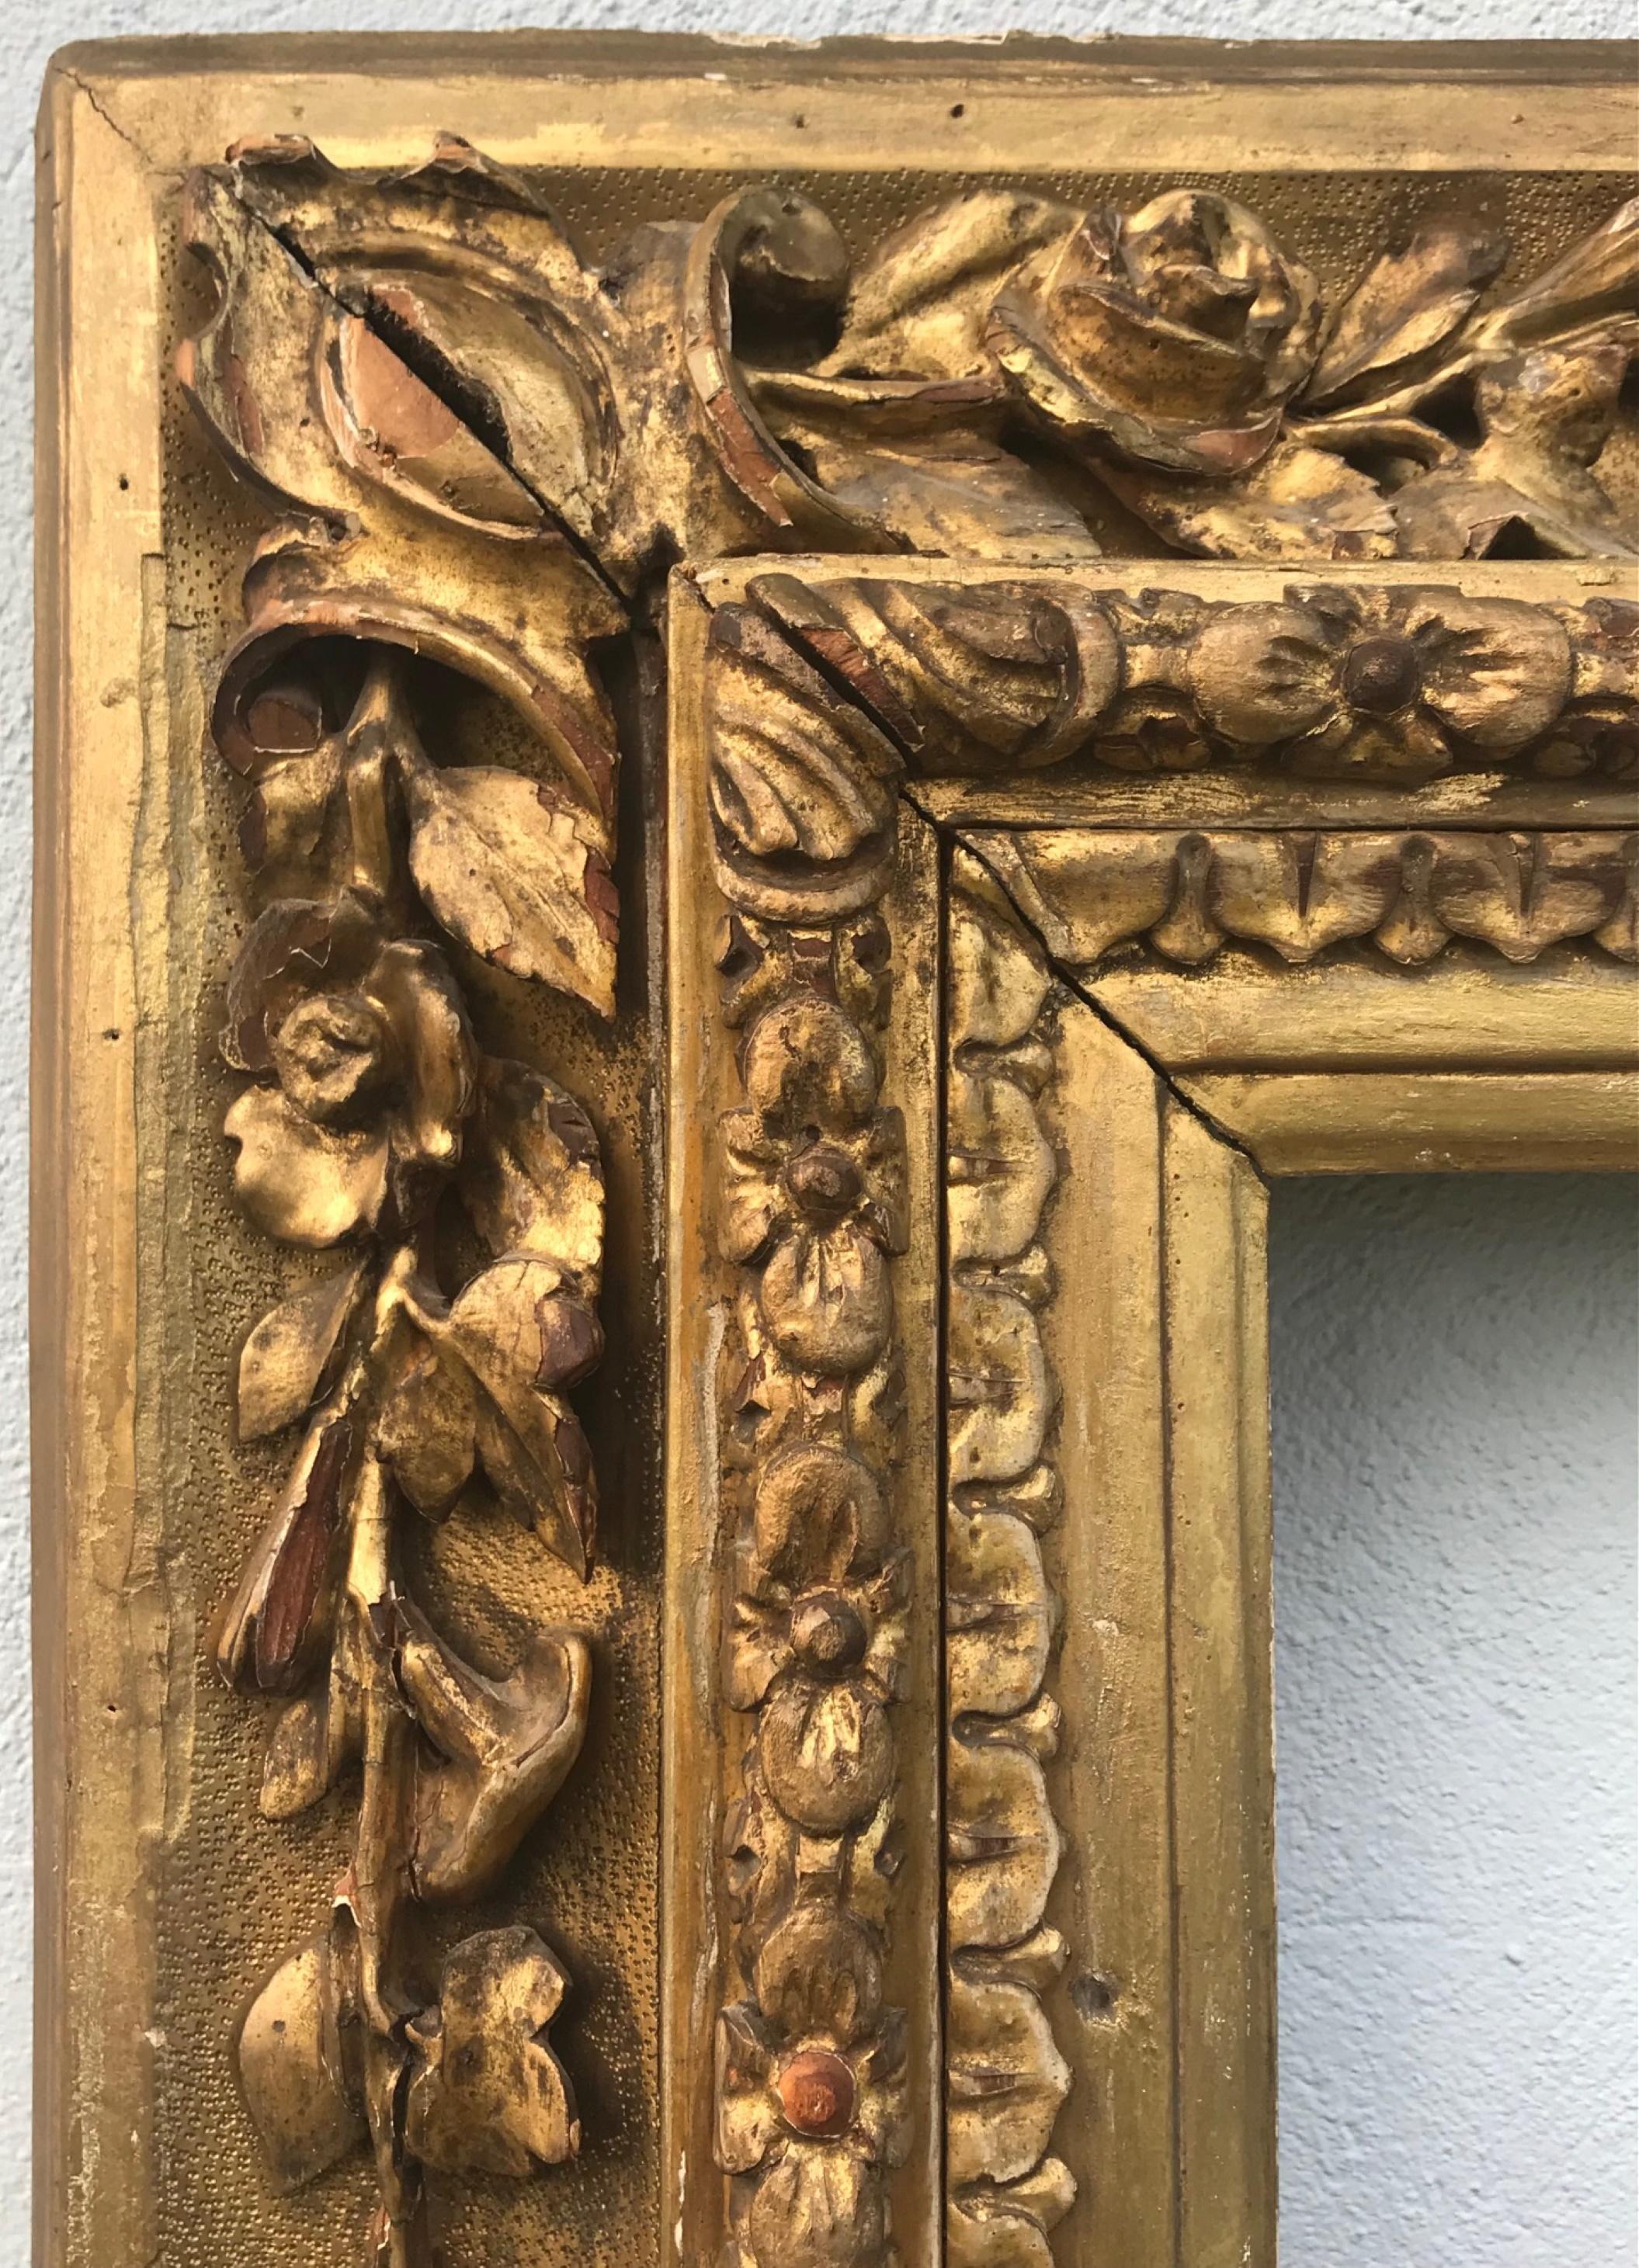 Large 18th century Venetian hand carved gilded frame

An extremely attractive antique hand carved and water gilded Italian frame from the 18th century. Created by a master carver, this frame is elaborately decorated with a finely carved variety of